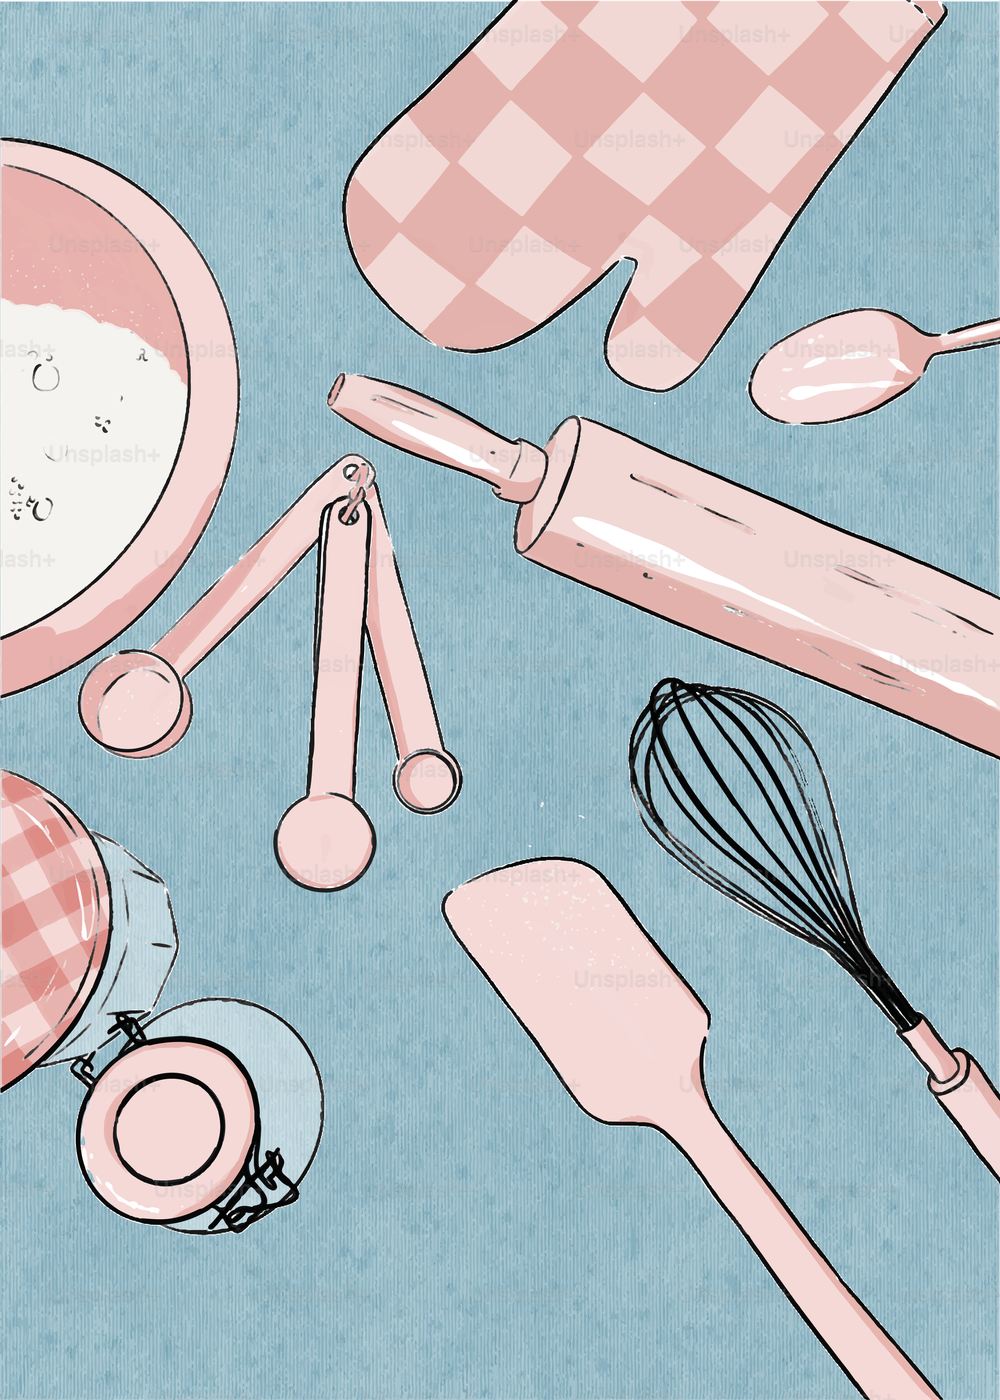 a drawing of kitchen utensils and other kitchen items